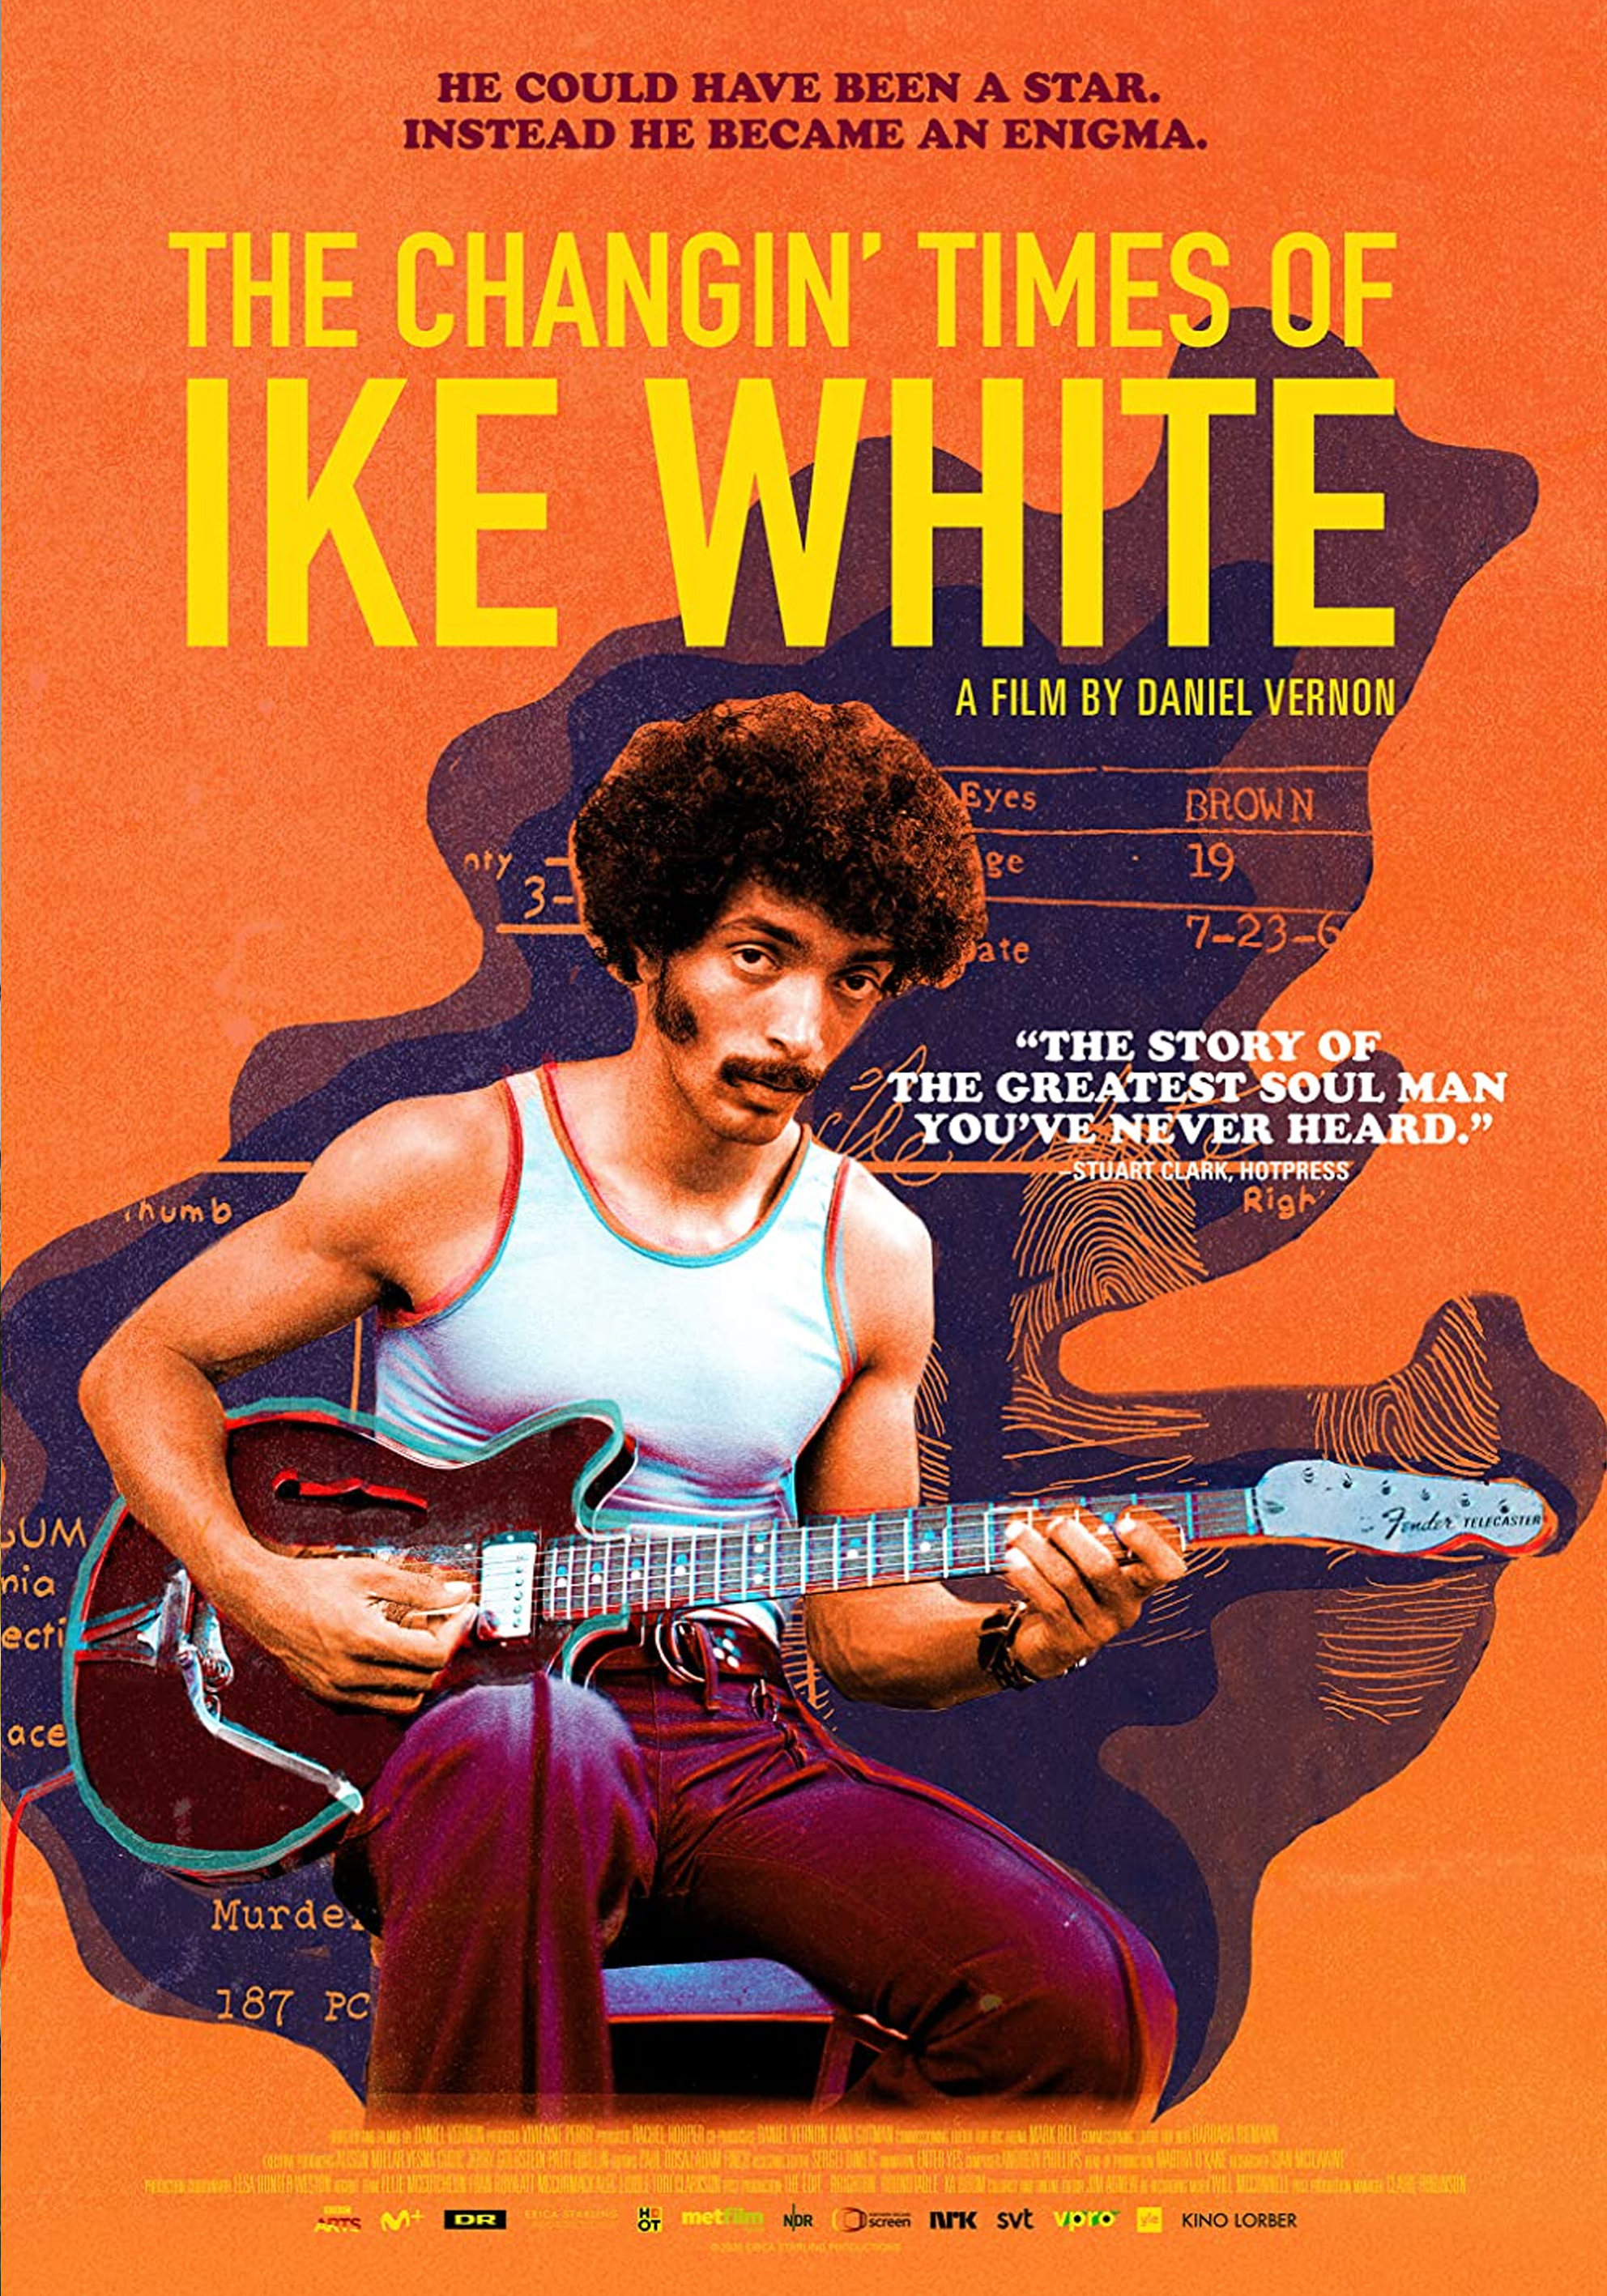 The Changin’ Times of Ike White poster